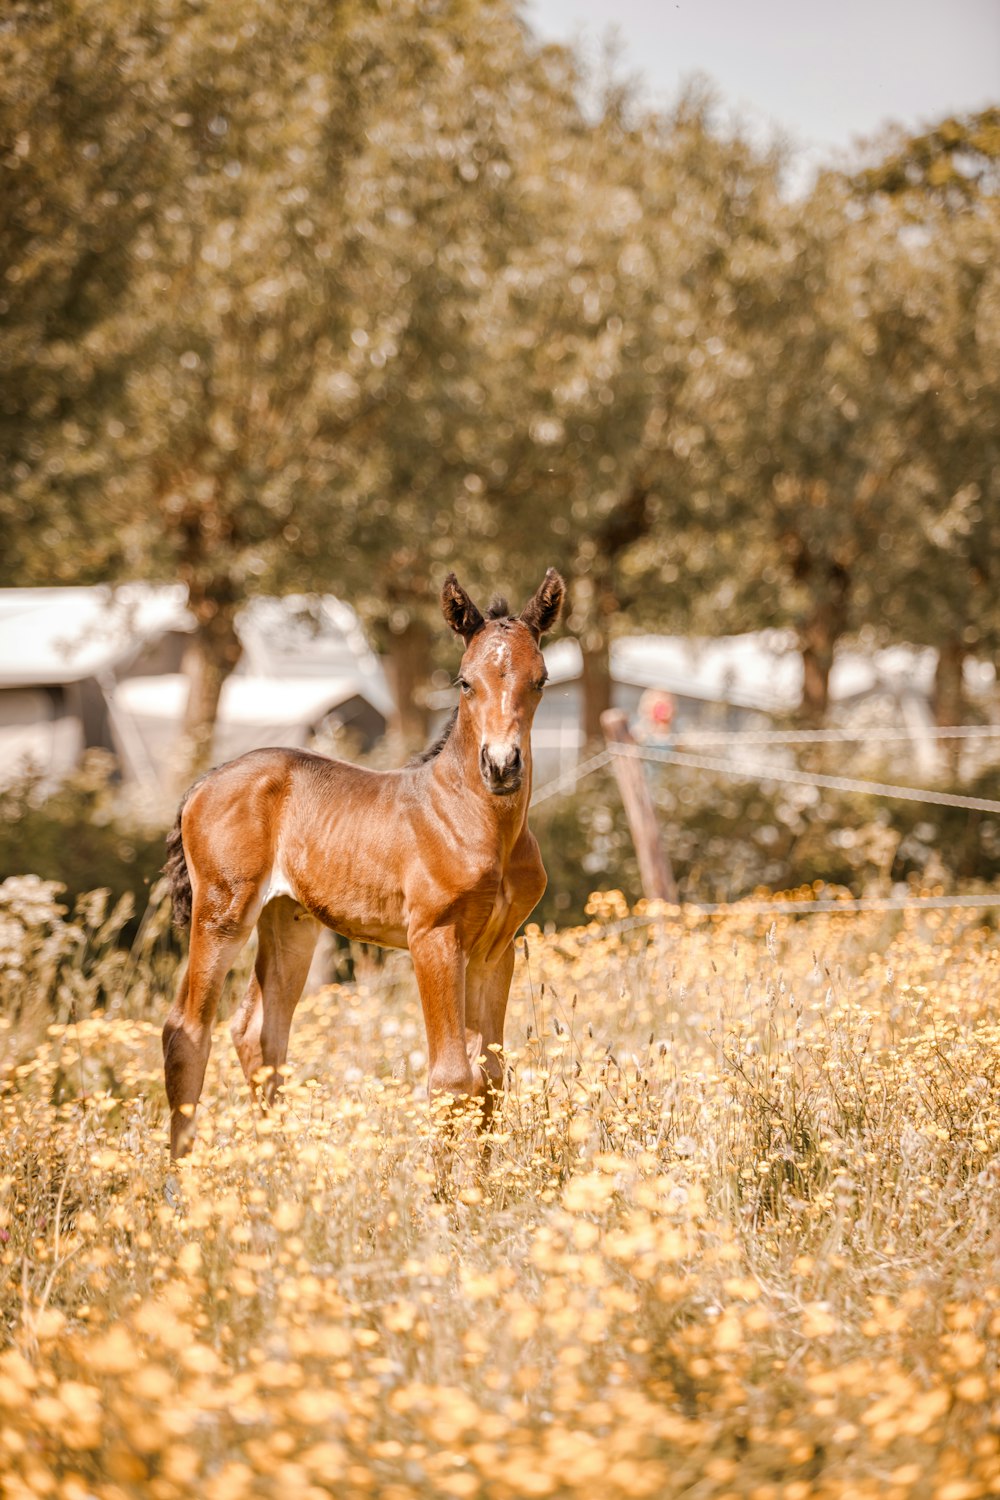 a young horse standing in a field of tall grass